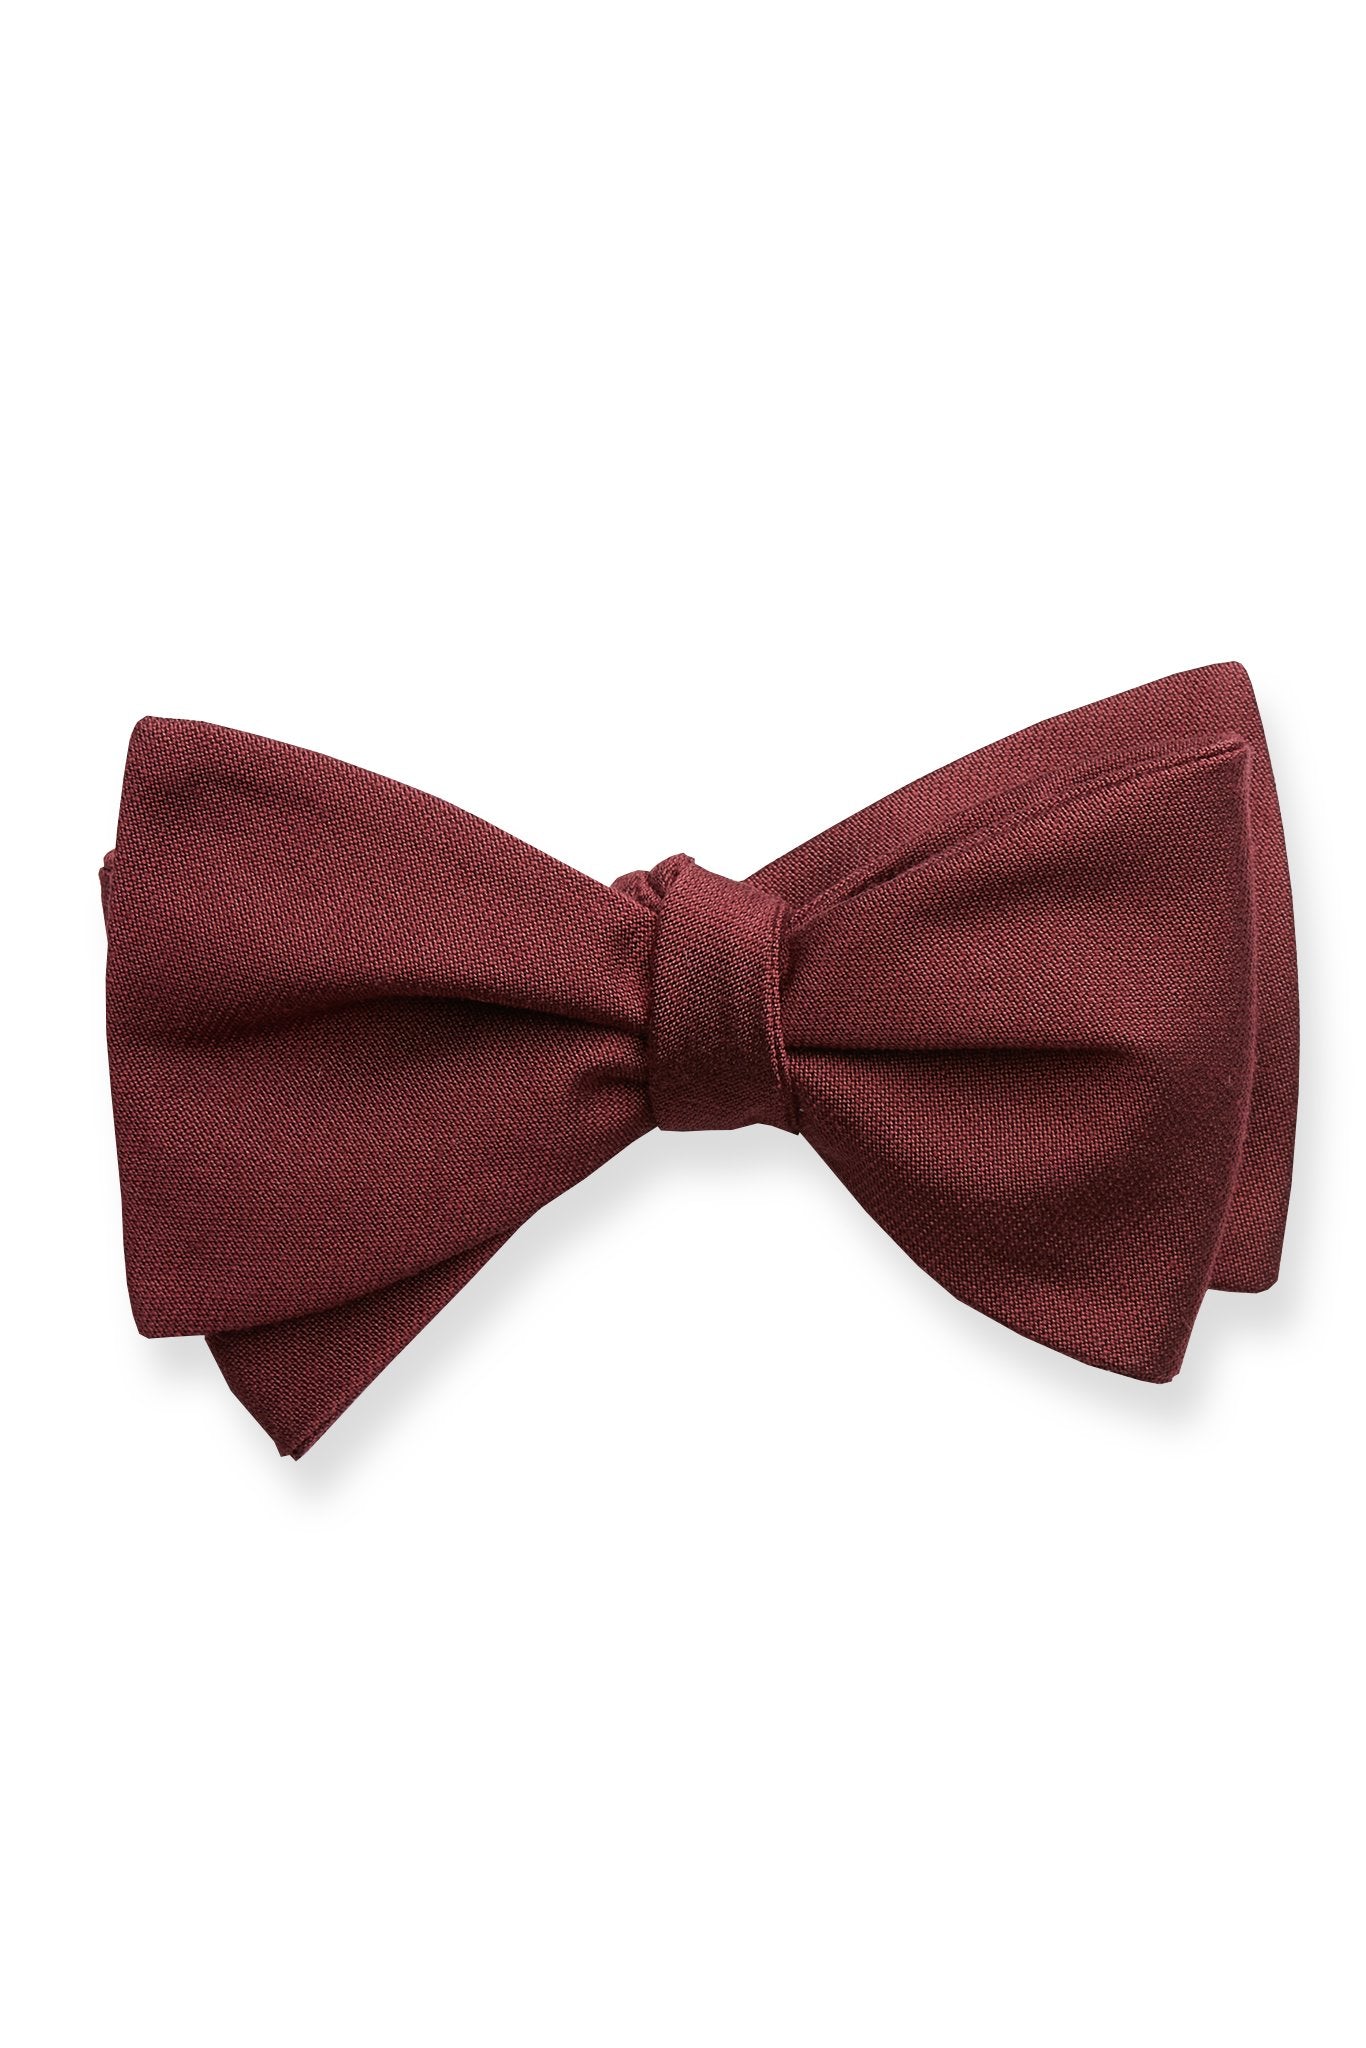 Daniel Bow Tie in rosewood by Birdy Grey, front view